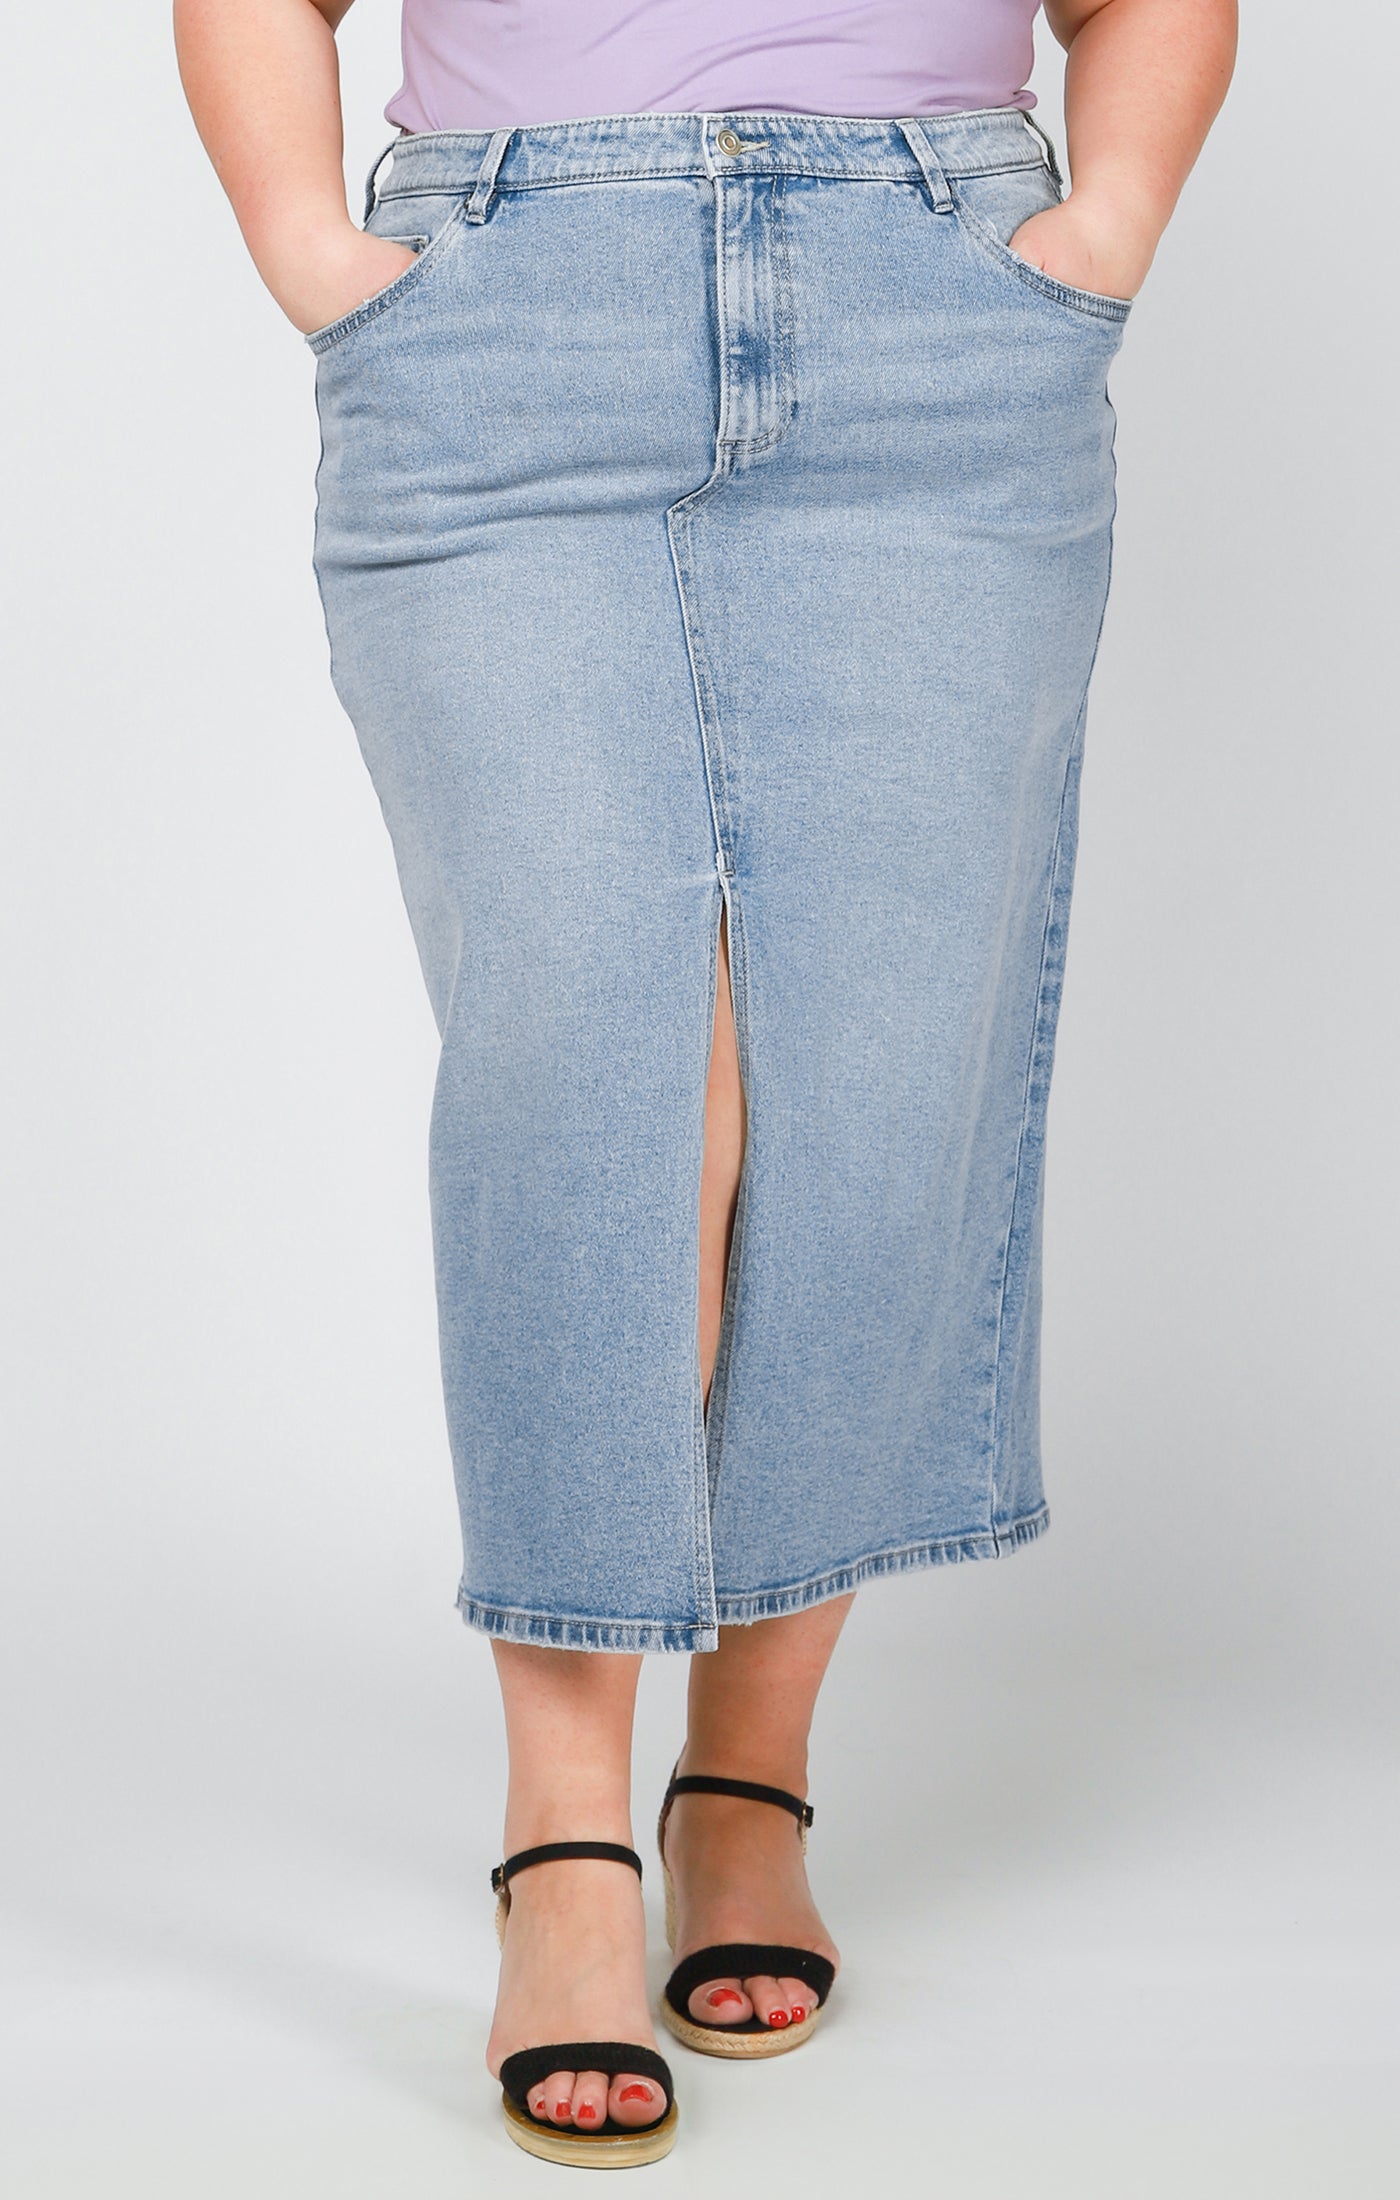 Denim Skirt Plus - Out of the Blue